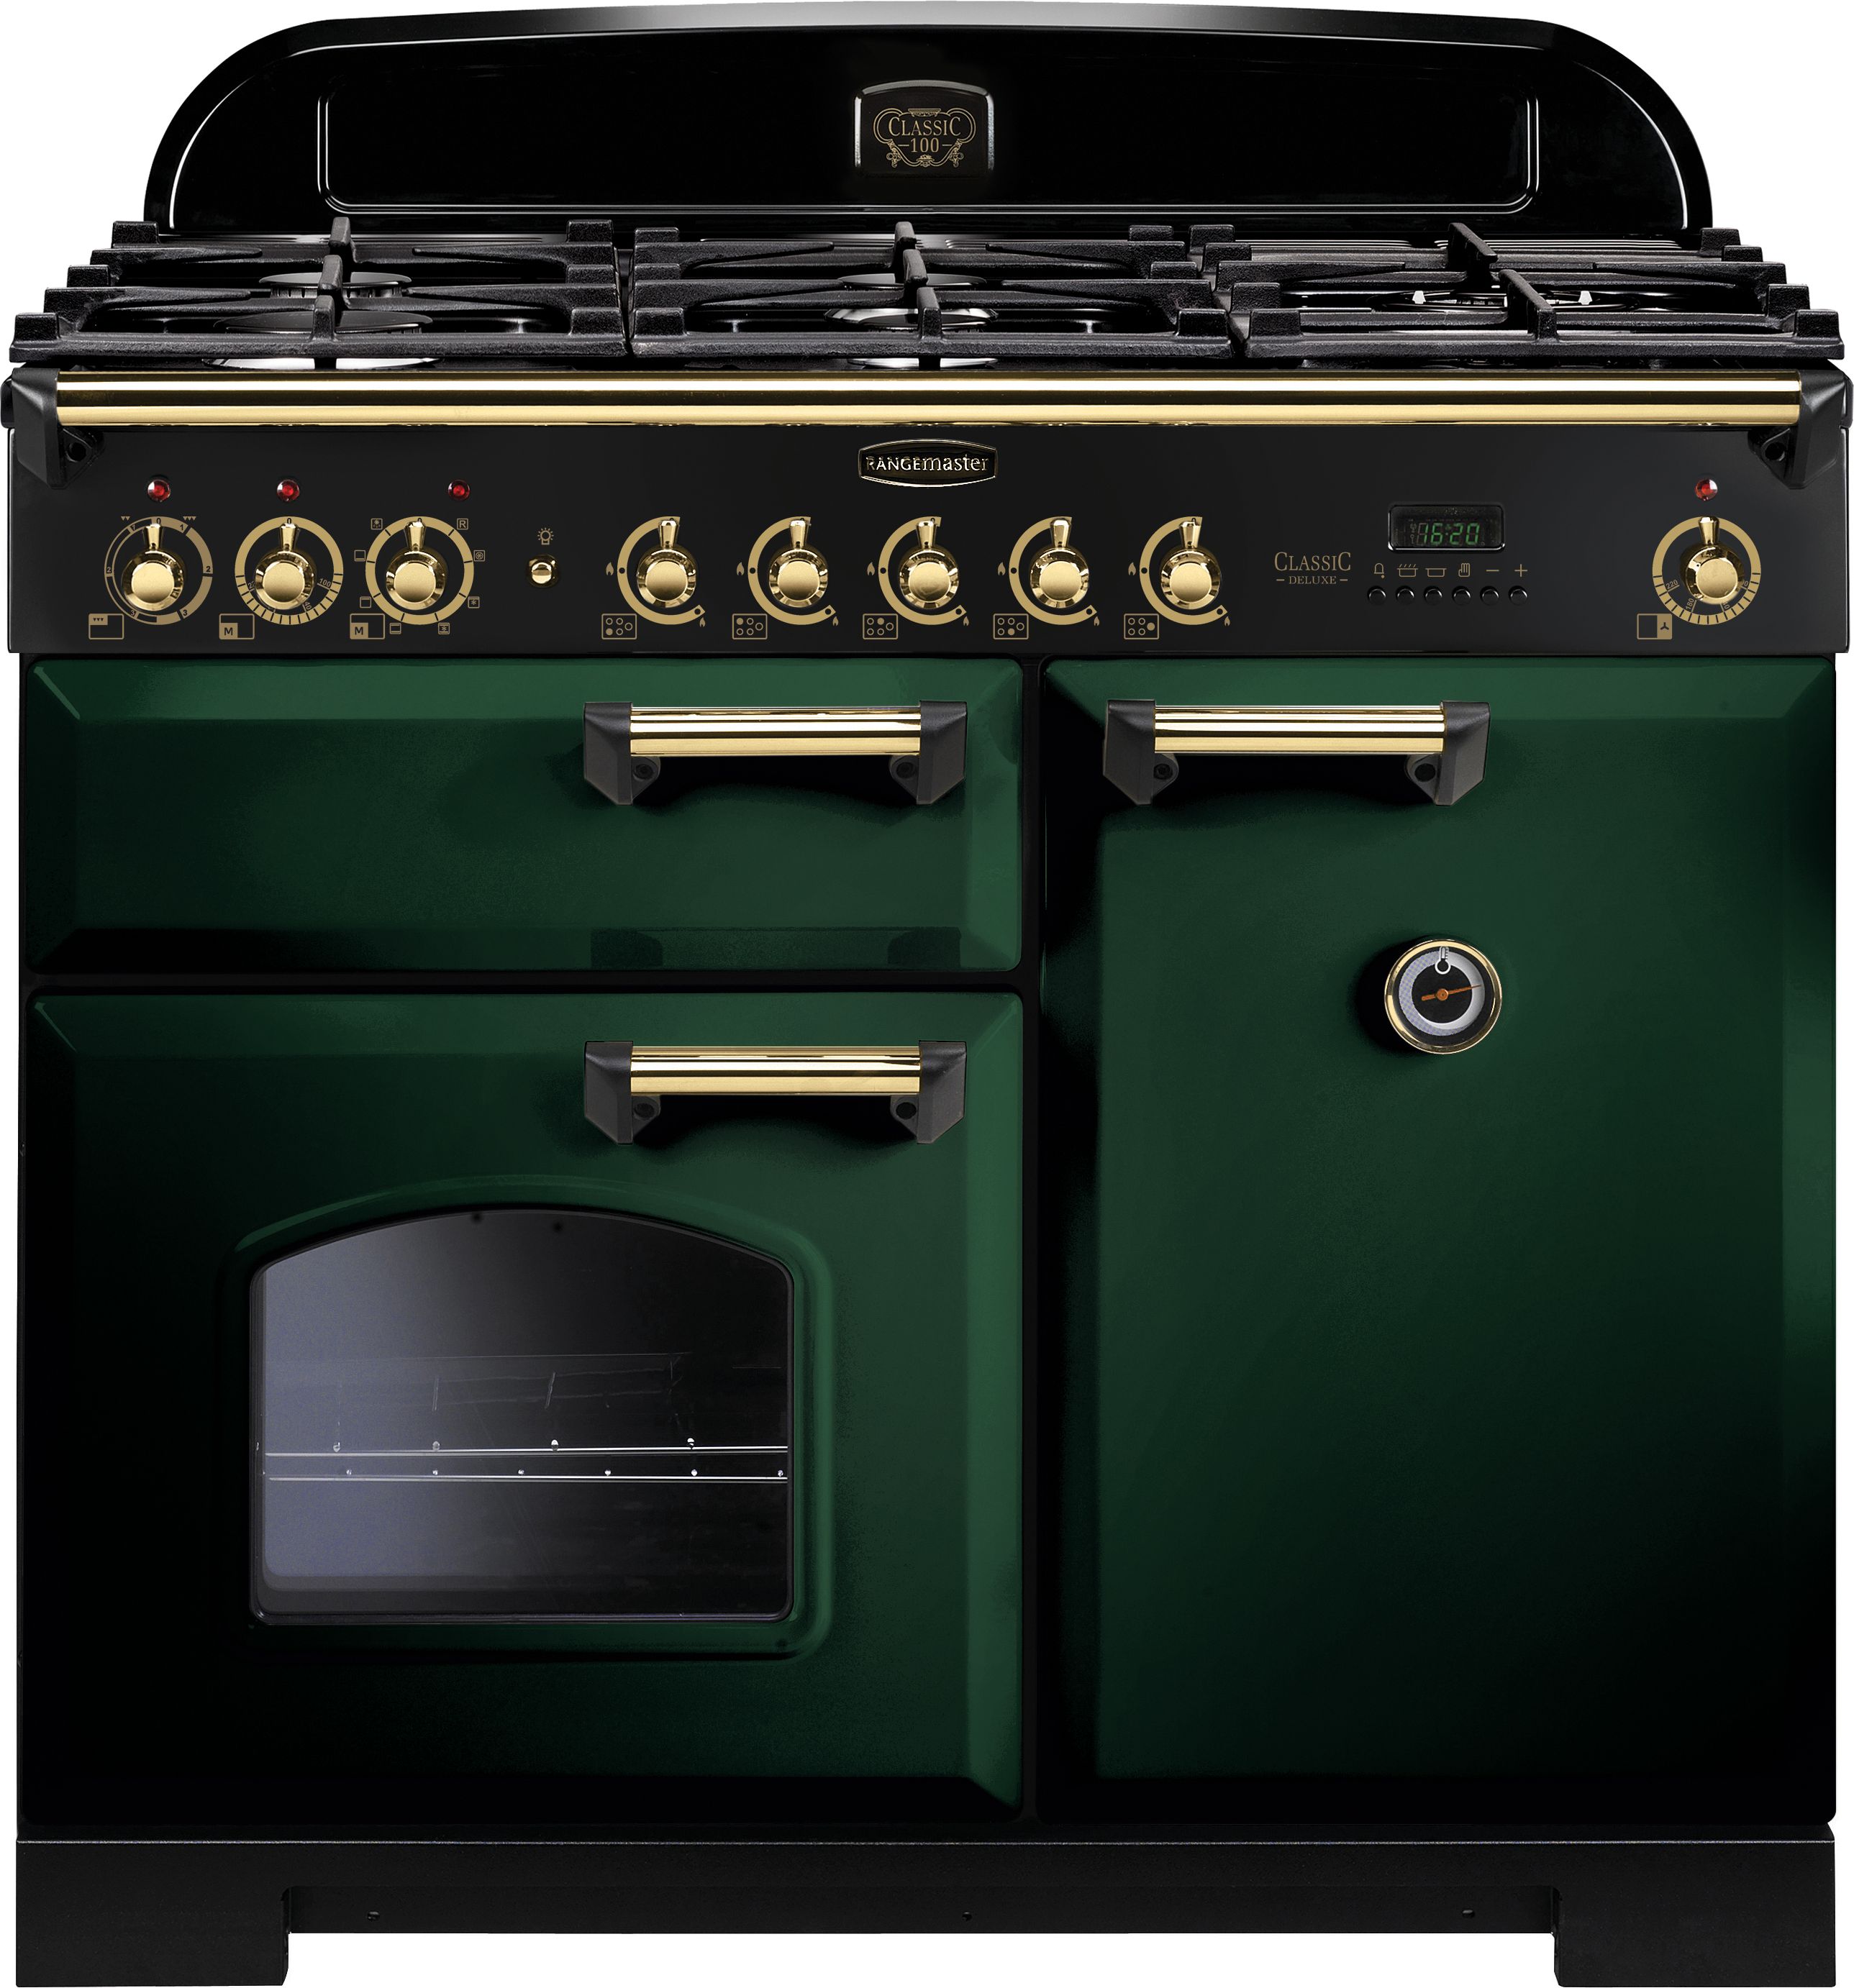 Rangemaster Classic Deluxe CDL100DFFRG/B 100cm Dual Fuel Range Cooker - Racing Green / Brass - A/A Rated, Green